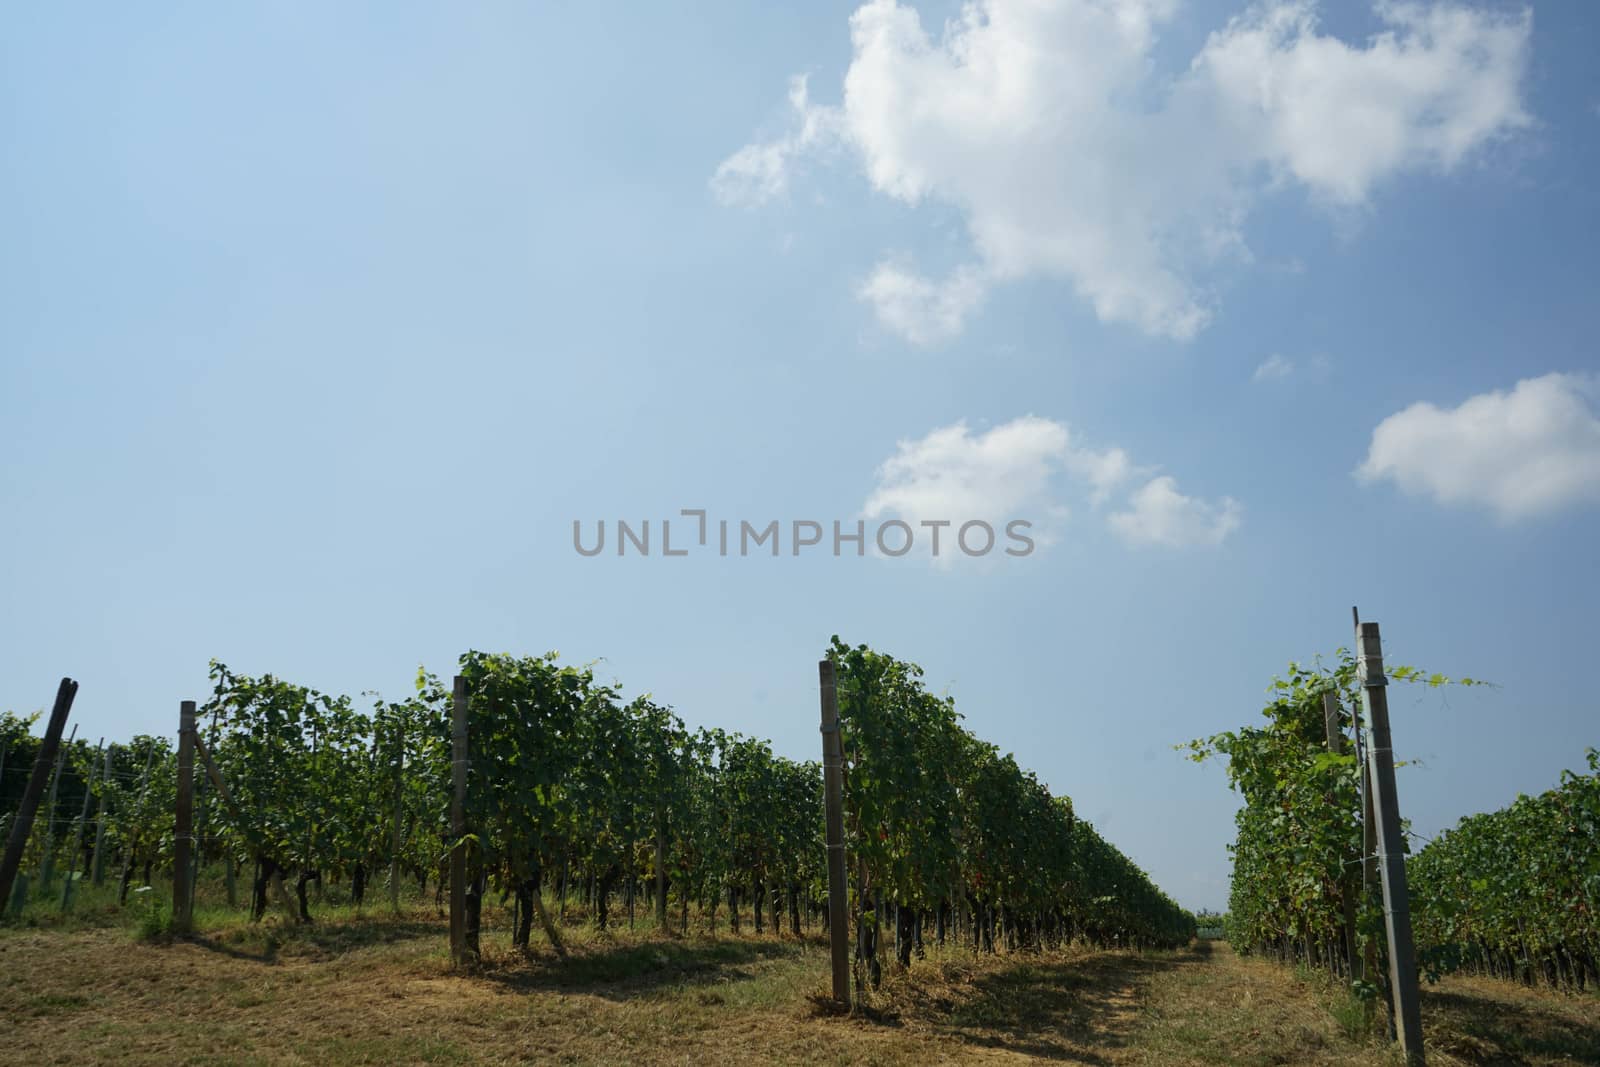 View of the vineyards near La Morra, Piedmont by cosca